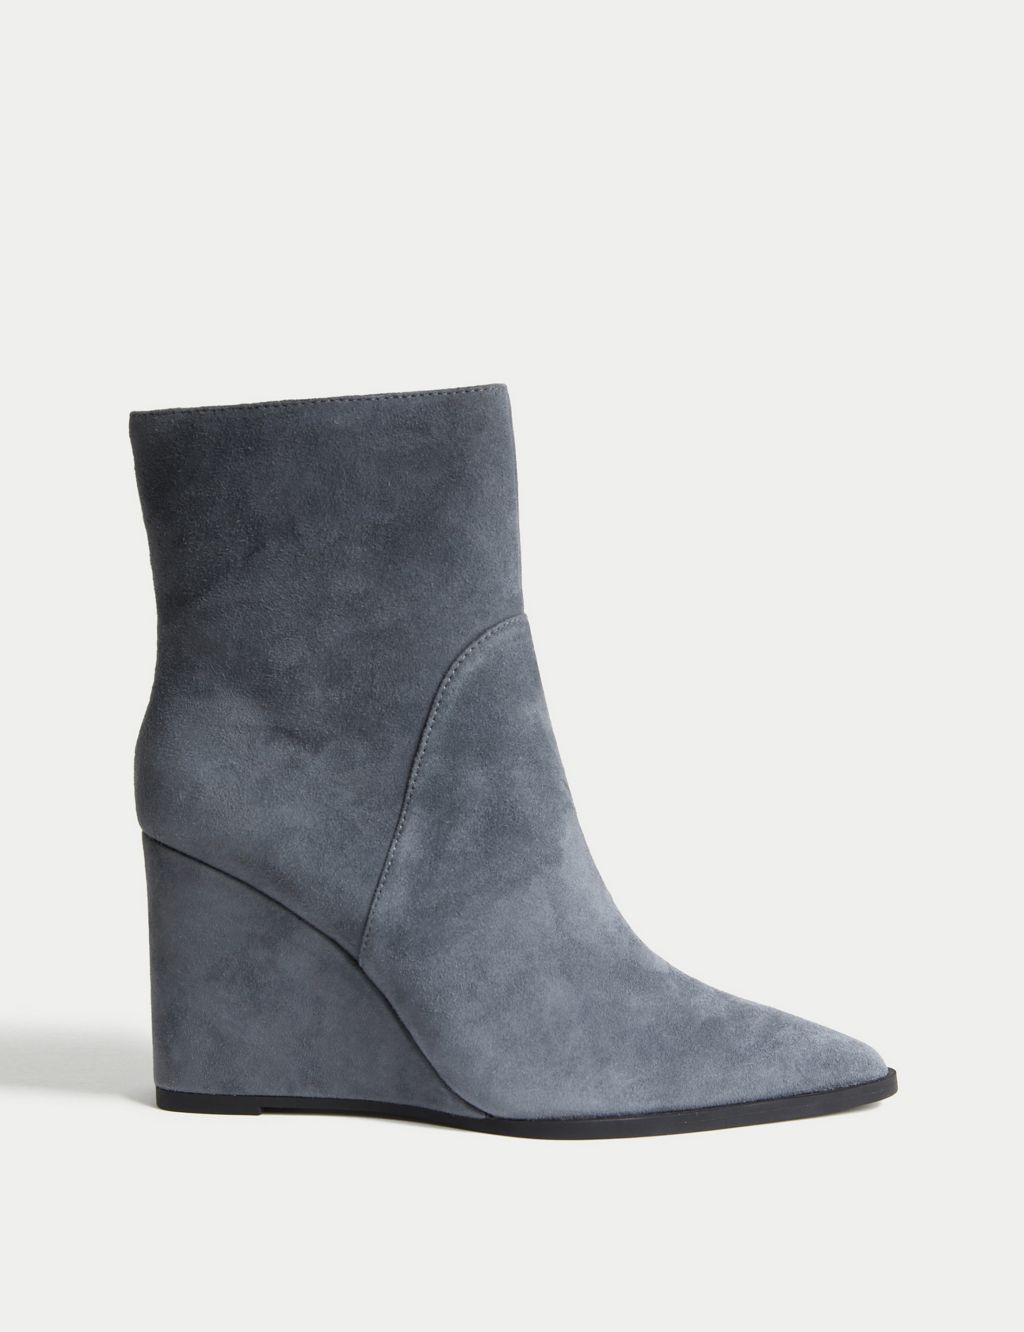 Suede Wedge Pointed Ankle Boots image 1